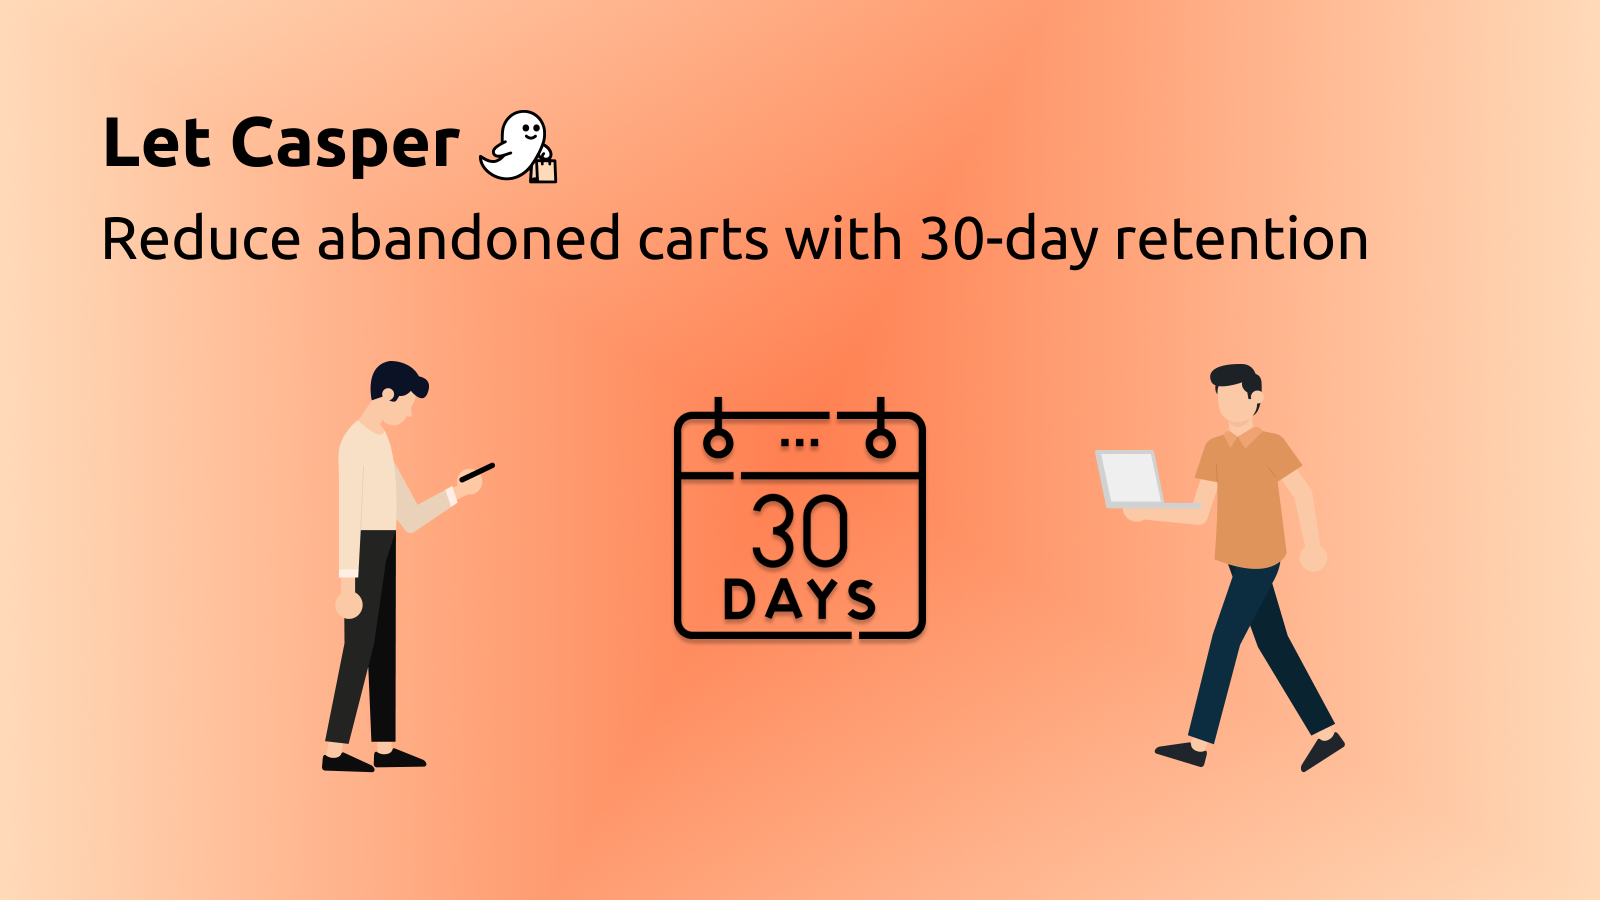 Save carts for 30 days with Casper app, wholesale cart